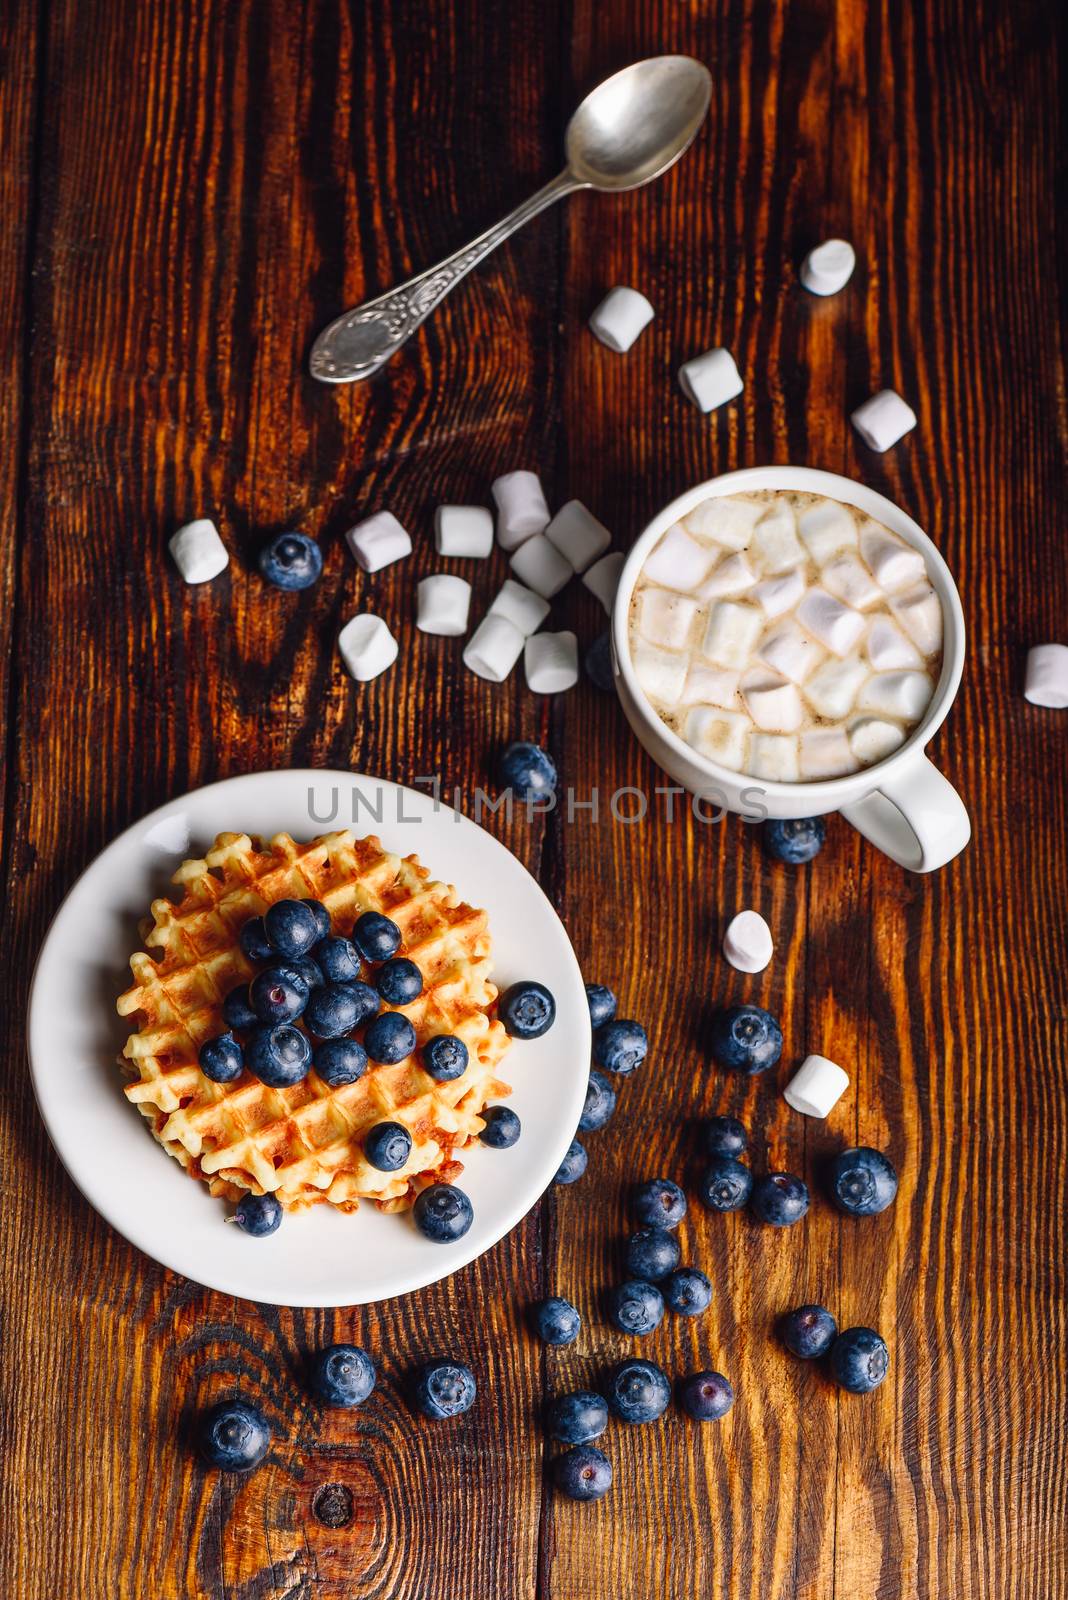 Homemade Waffles on Plate with Fresh Blueberry and Cup of Hot Chocolate with Marshmallow. Vertical orientation.